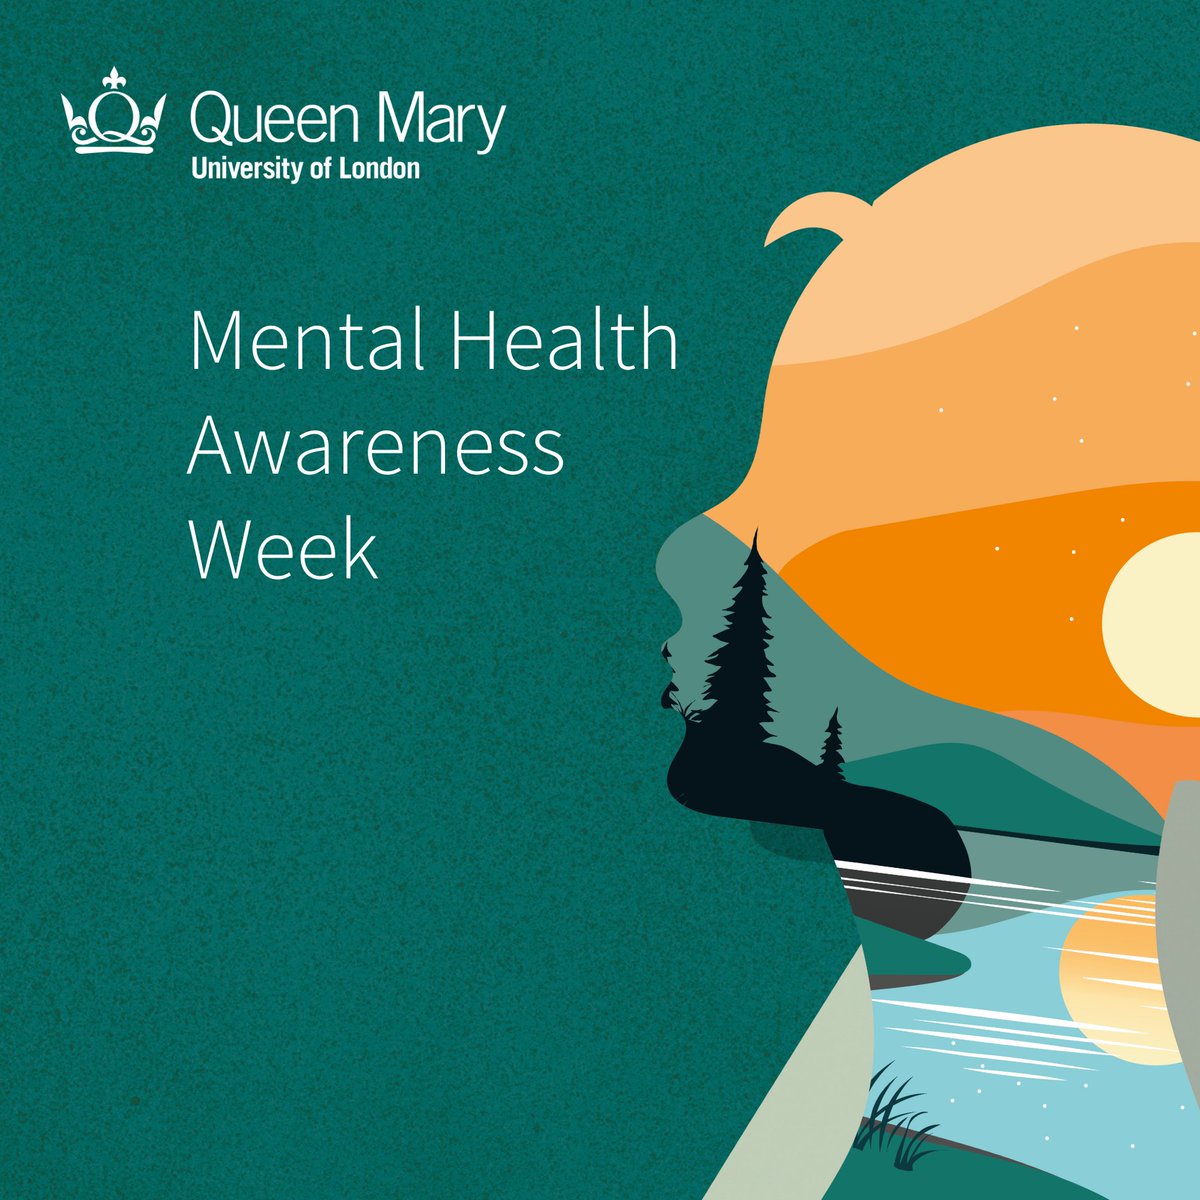 #MentalHealthAwarenessWeek 2024 is taking place from 13 - 19 May. This year, the theme is 'Movement'. At Queen Mary, we prioritise the wellbeing of our students and colleagues, offering round-the-clock support services. Learn more: bit.ly/3woHevF